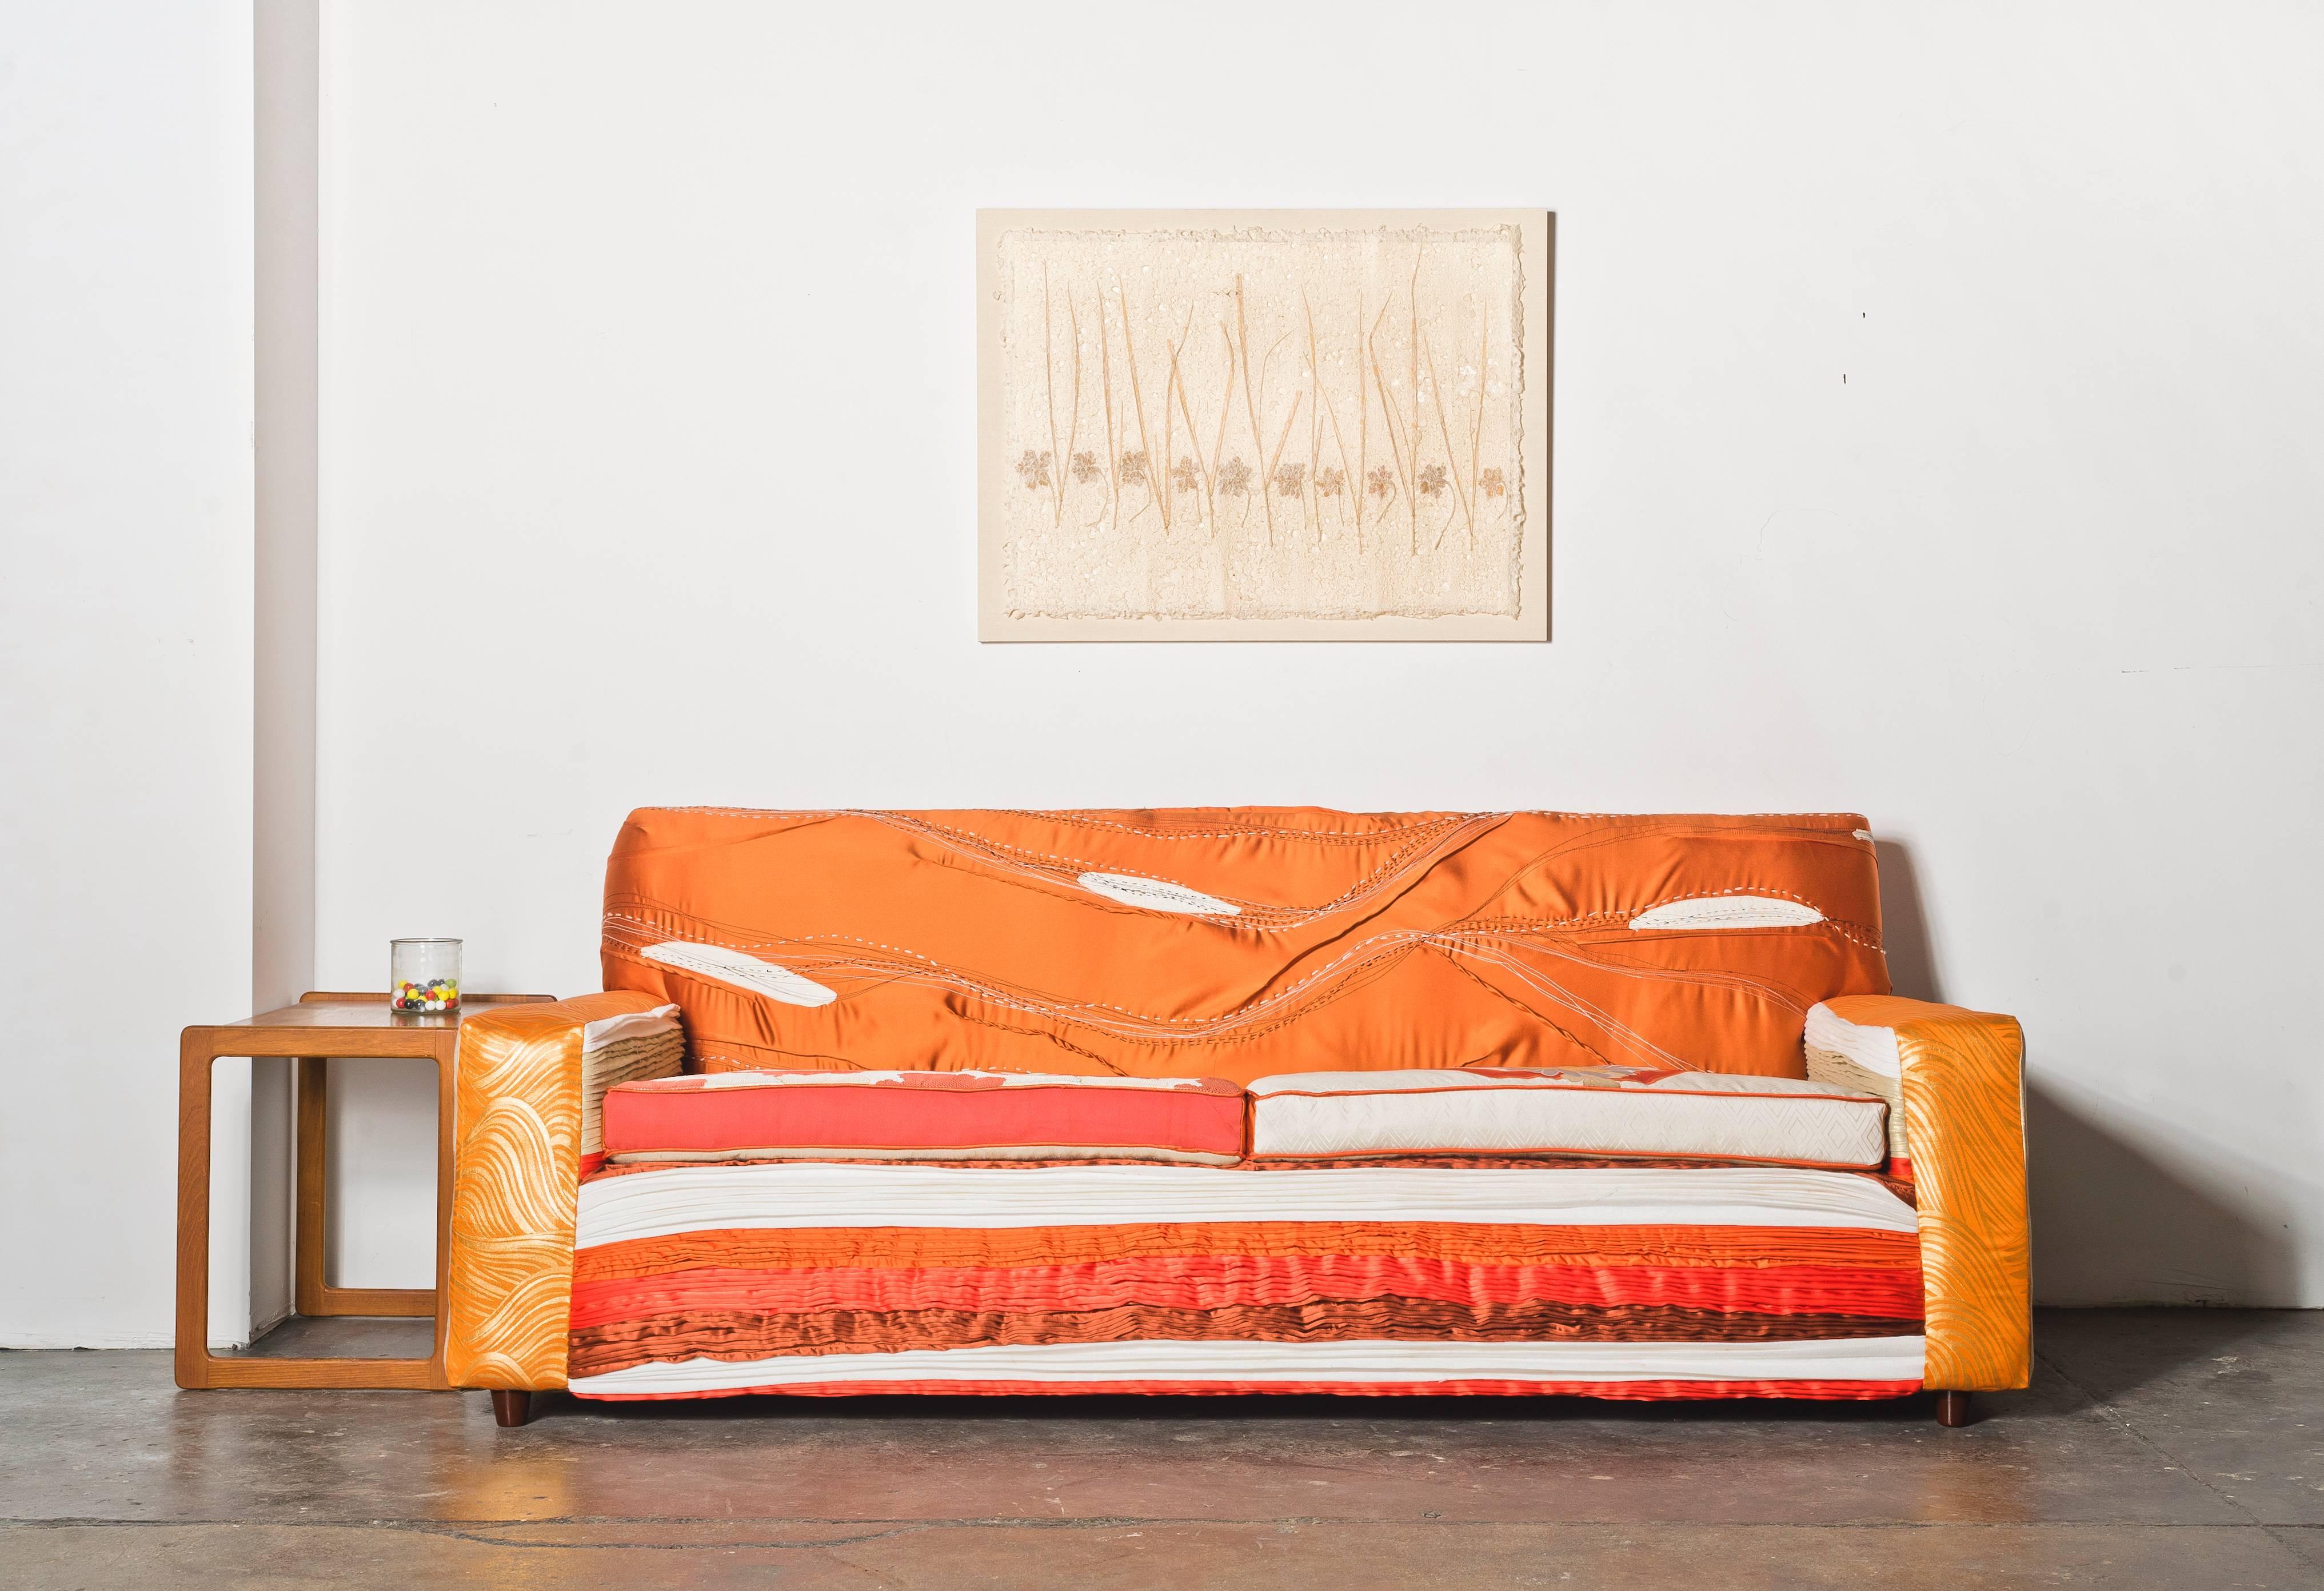 This sofa is part of the Gendo Collection, the first collaboration between couture-trained fabric artist and designer, Maki Yamamoto and Melissa Dougherty, designer and creator of one-of-a-kind upholstered seating. The collection includes a sofa,